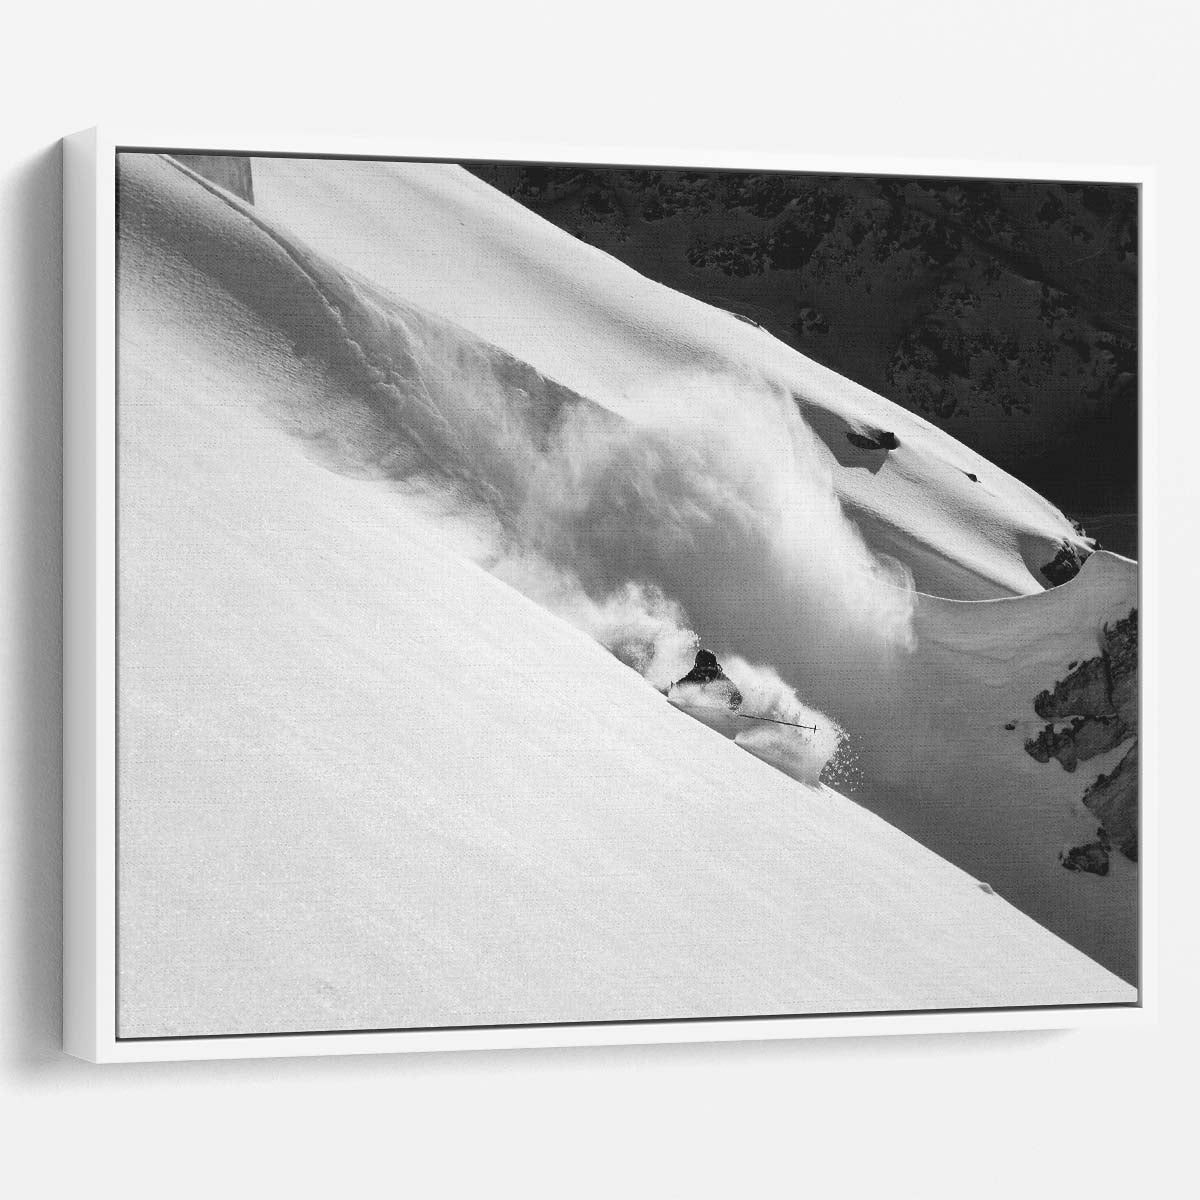 Explosive Freeride Skiing in Swiss Alps Wall Art by Luxuriance Designs. Made in USA.